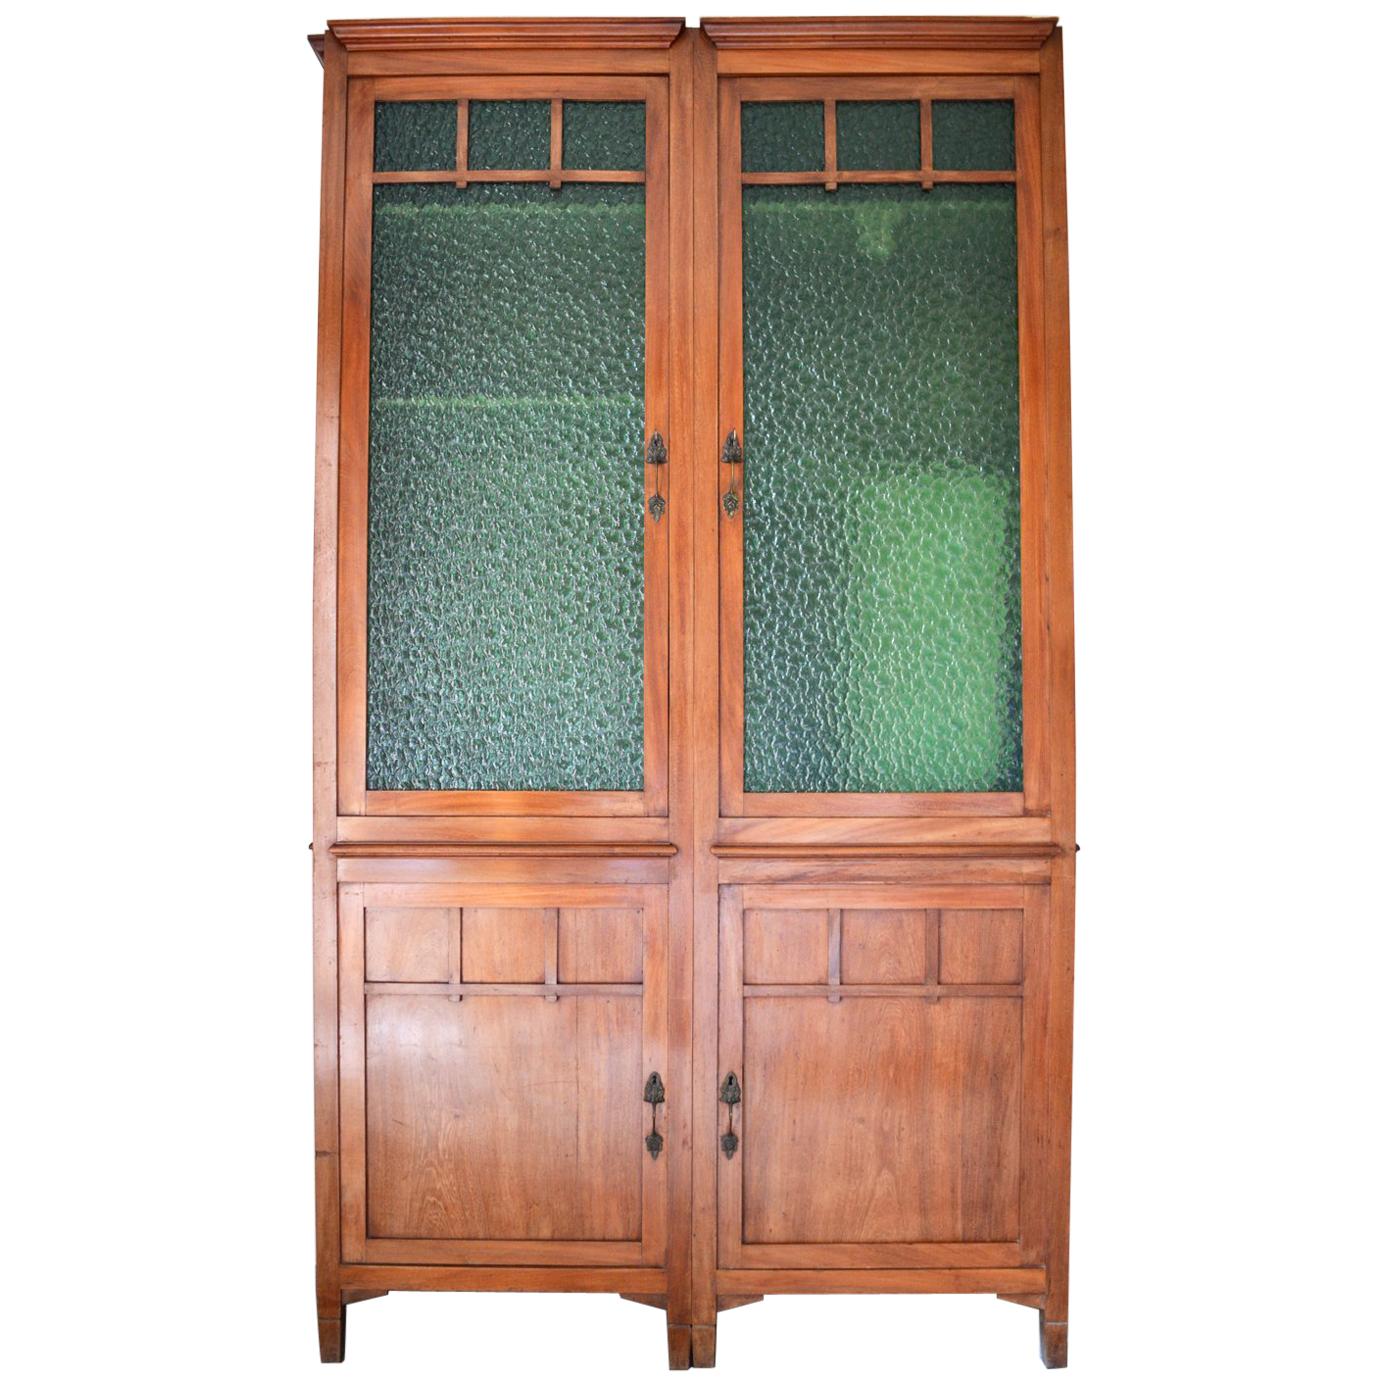 Pair of Art Nouveau Modular Bookcases, Cherry Wood and Stained Glass, 1910s